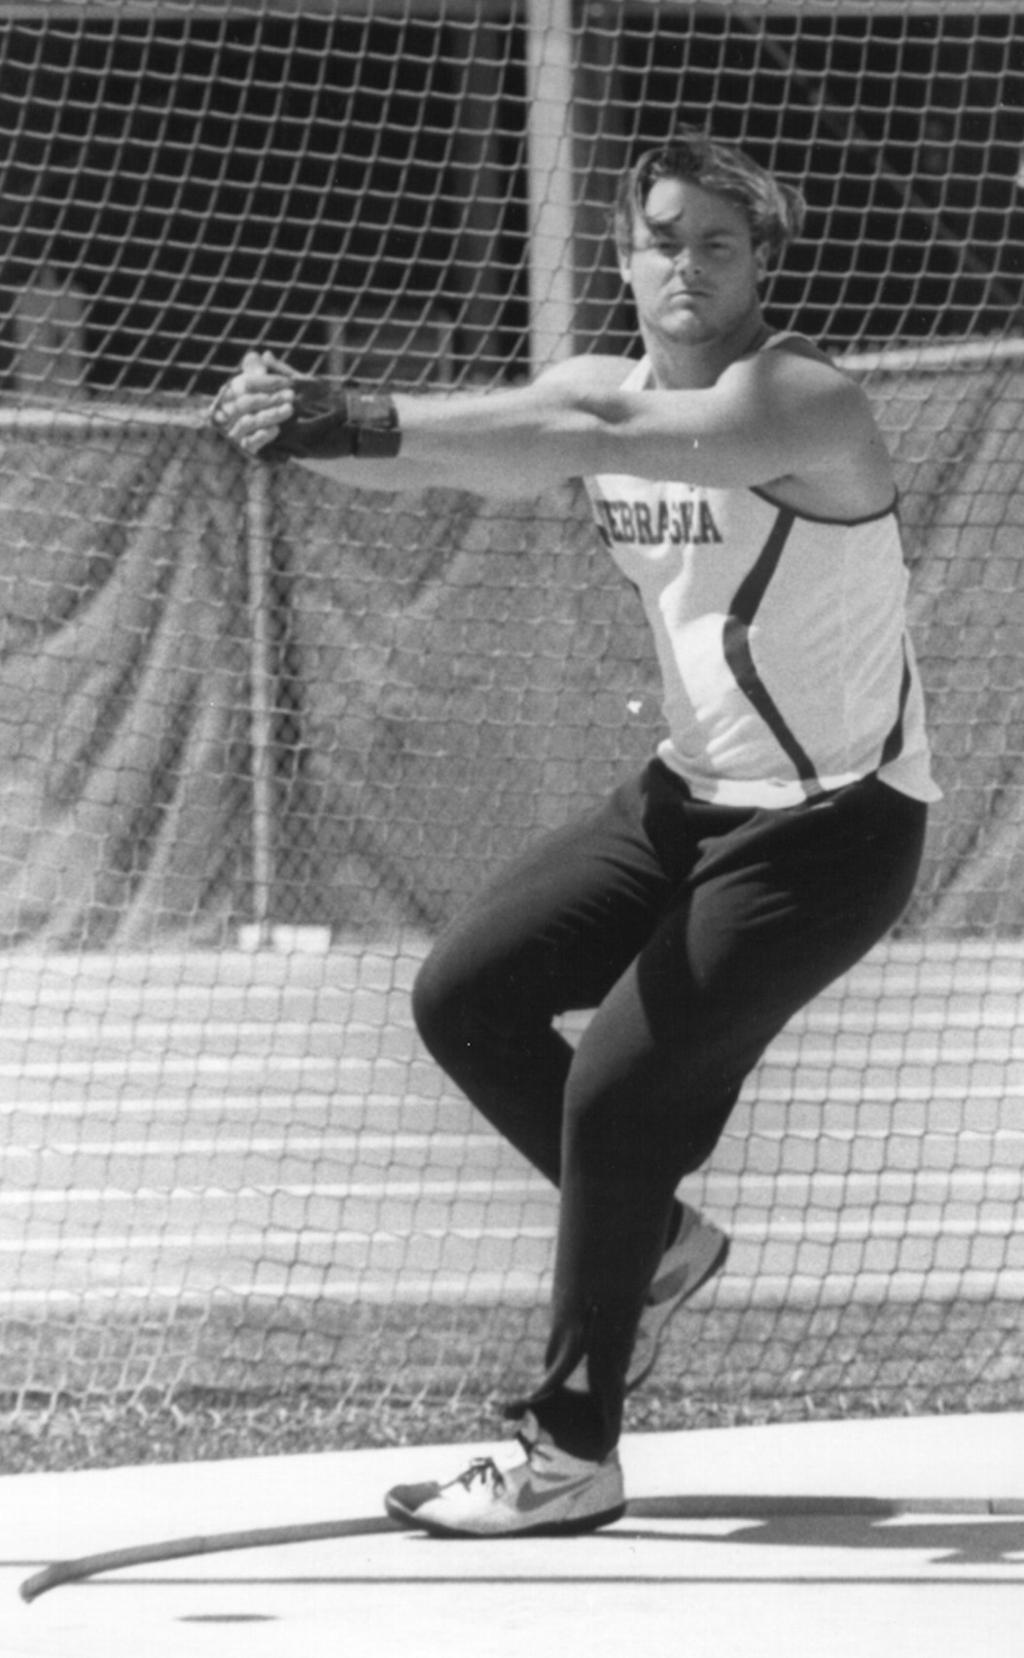 men s outdoor all-americans Scott Warren was a four-time NCAA All-American for Nebraska in the throws. Warren earned two honors in the indoor weight throw and two in the javelin.